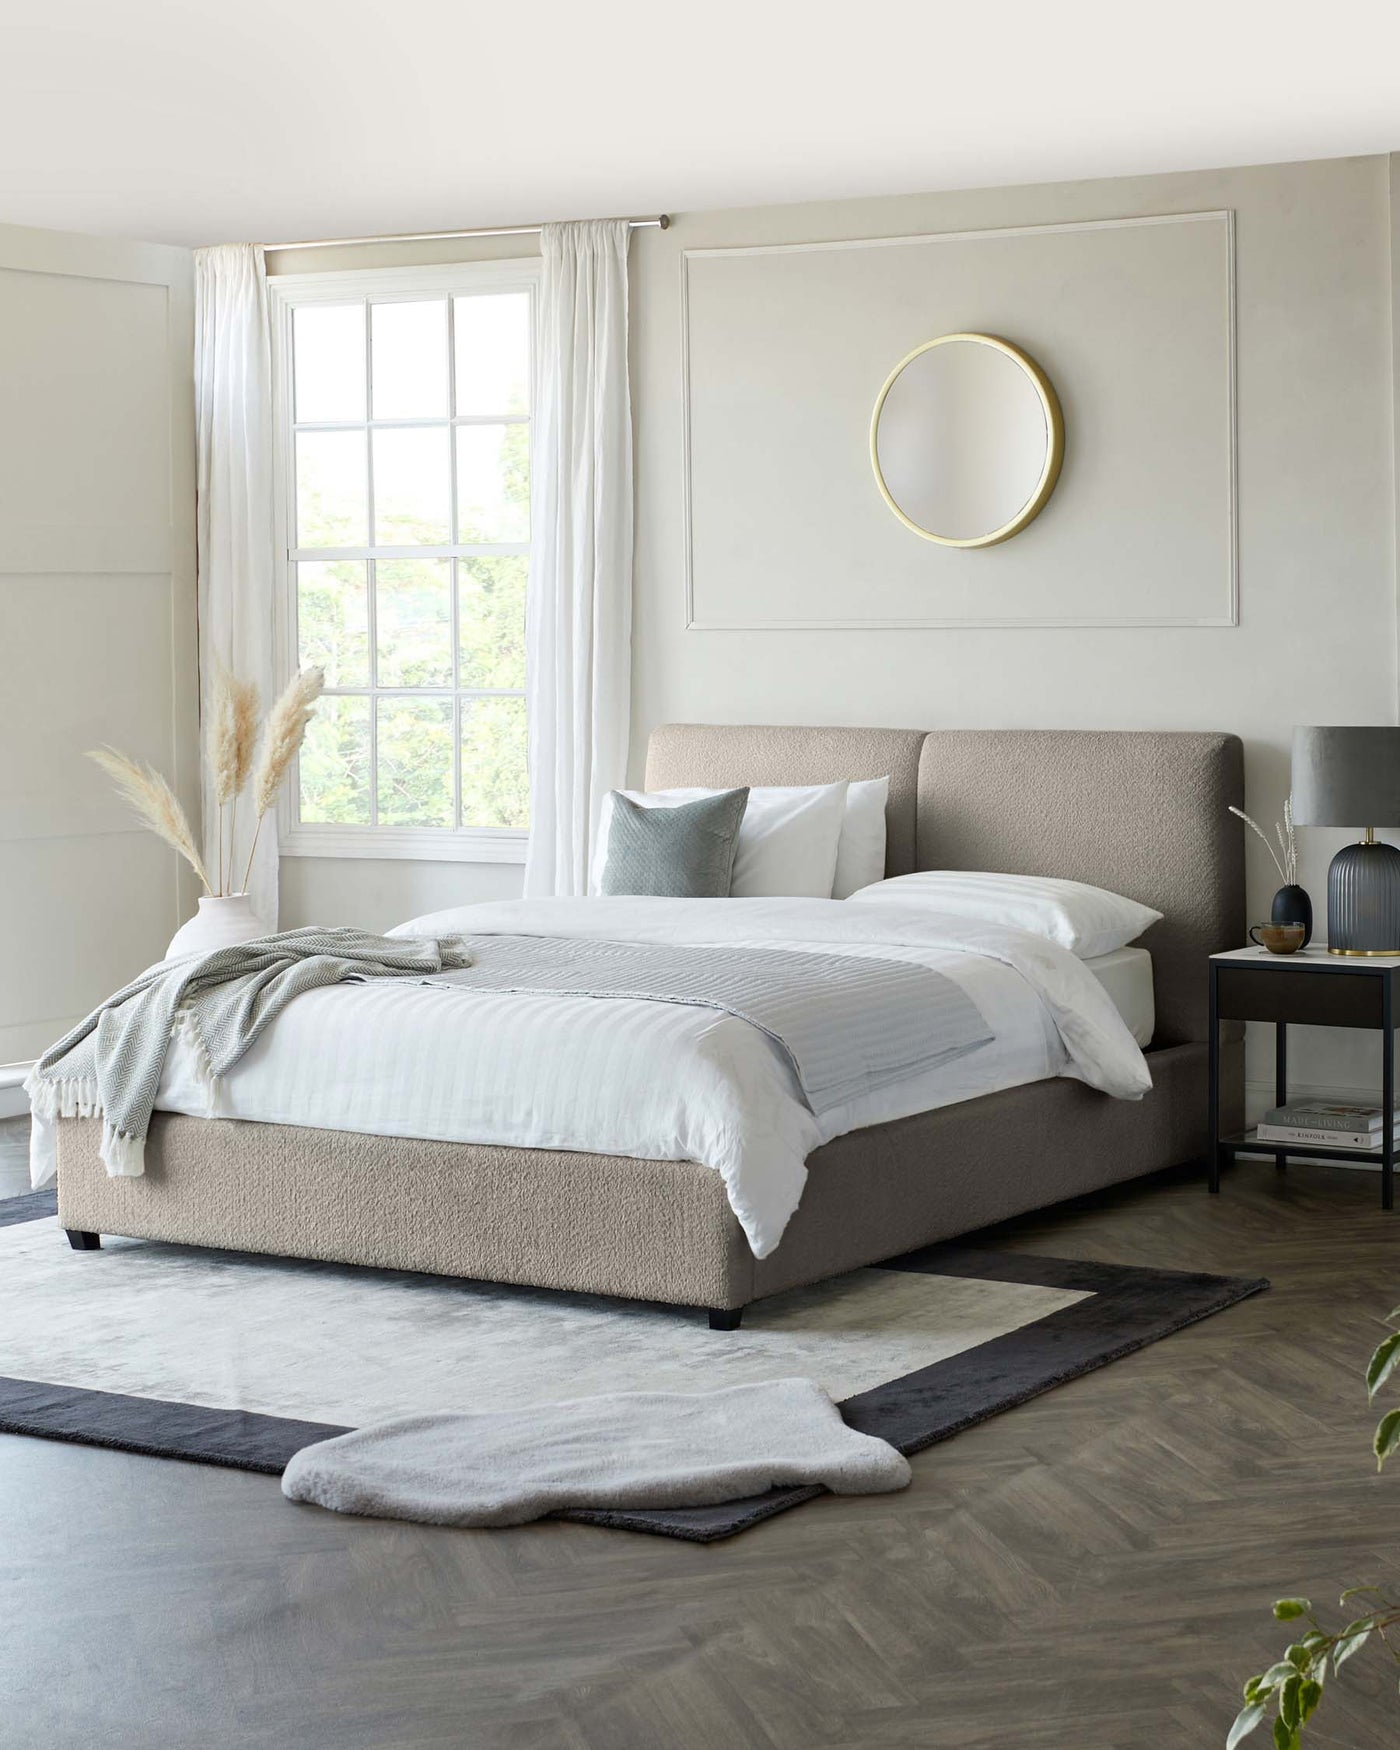 Modern minimalist bedroom featuring a large king-sized bed with an upholstered headboard in a neutral beige tone, complemented by white bedding and assorted grey pillows. To the right, a sleek black nightstand with a small drawer, topped by a contemporary lamp with a cylindrical shade. A textured grey and black area rug partially lies beneath the bed, adding depth to the room's clean aesthetic.